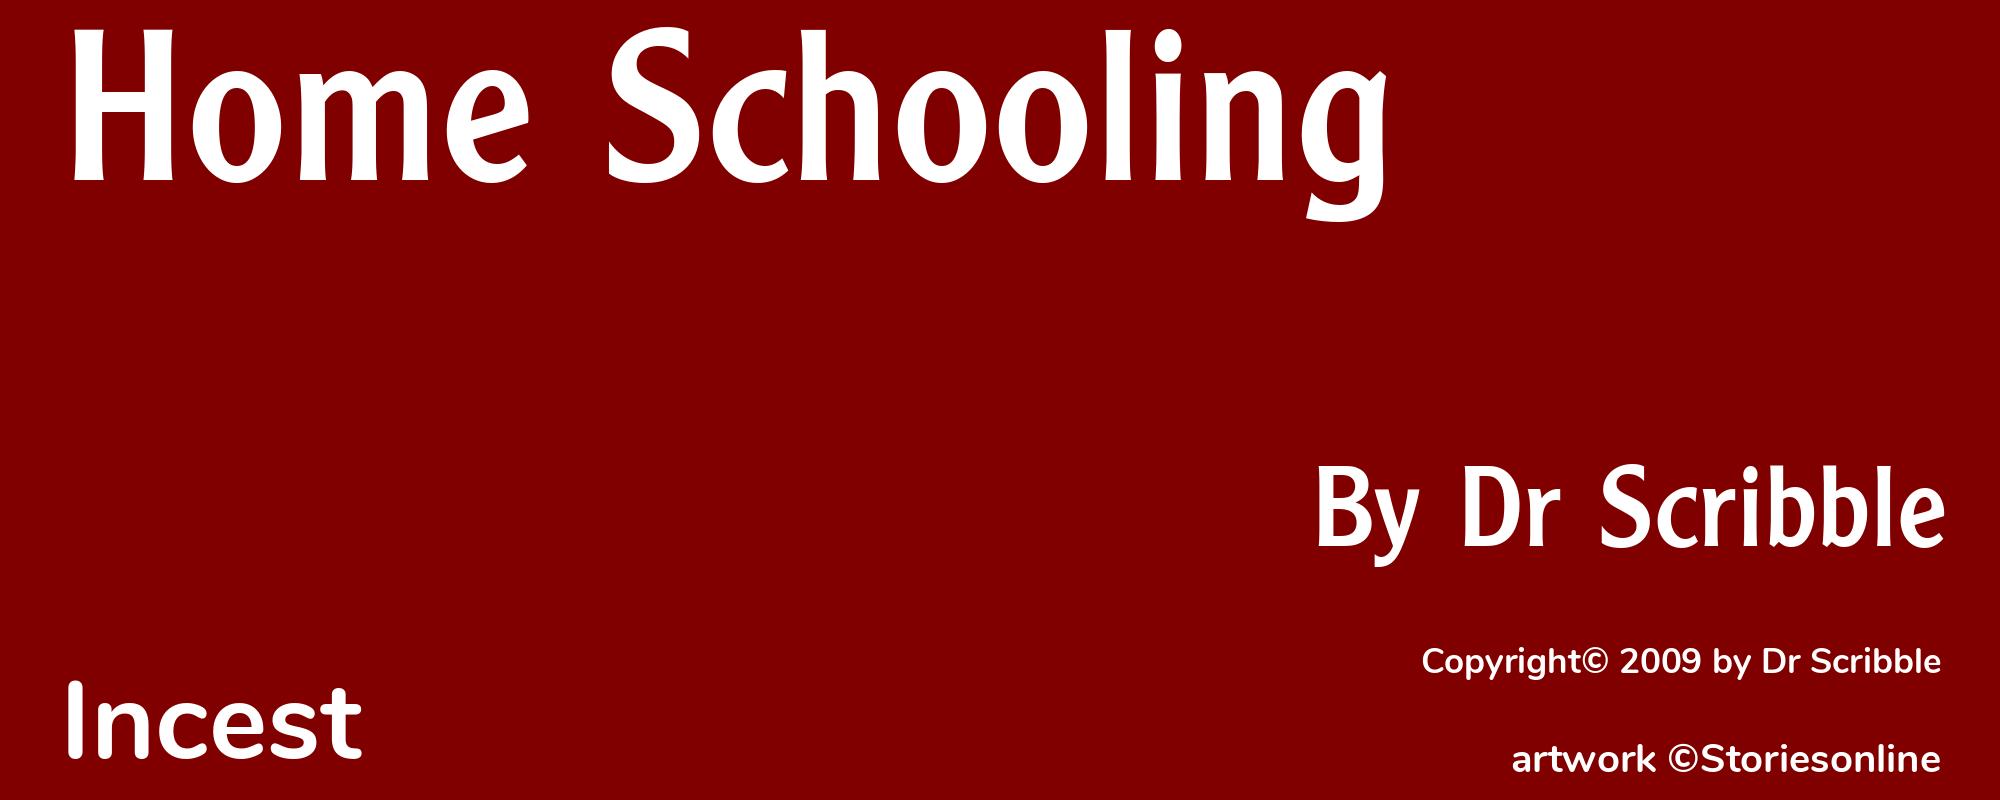 Home Schooling - Cover